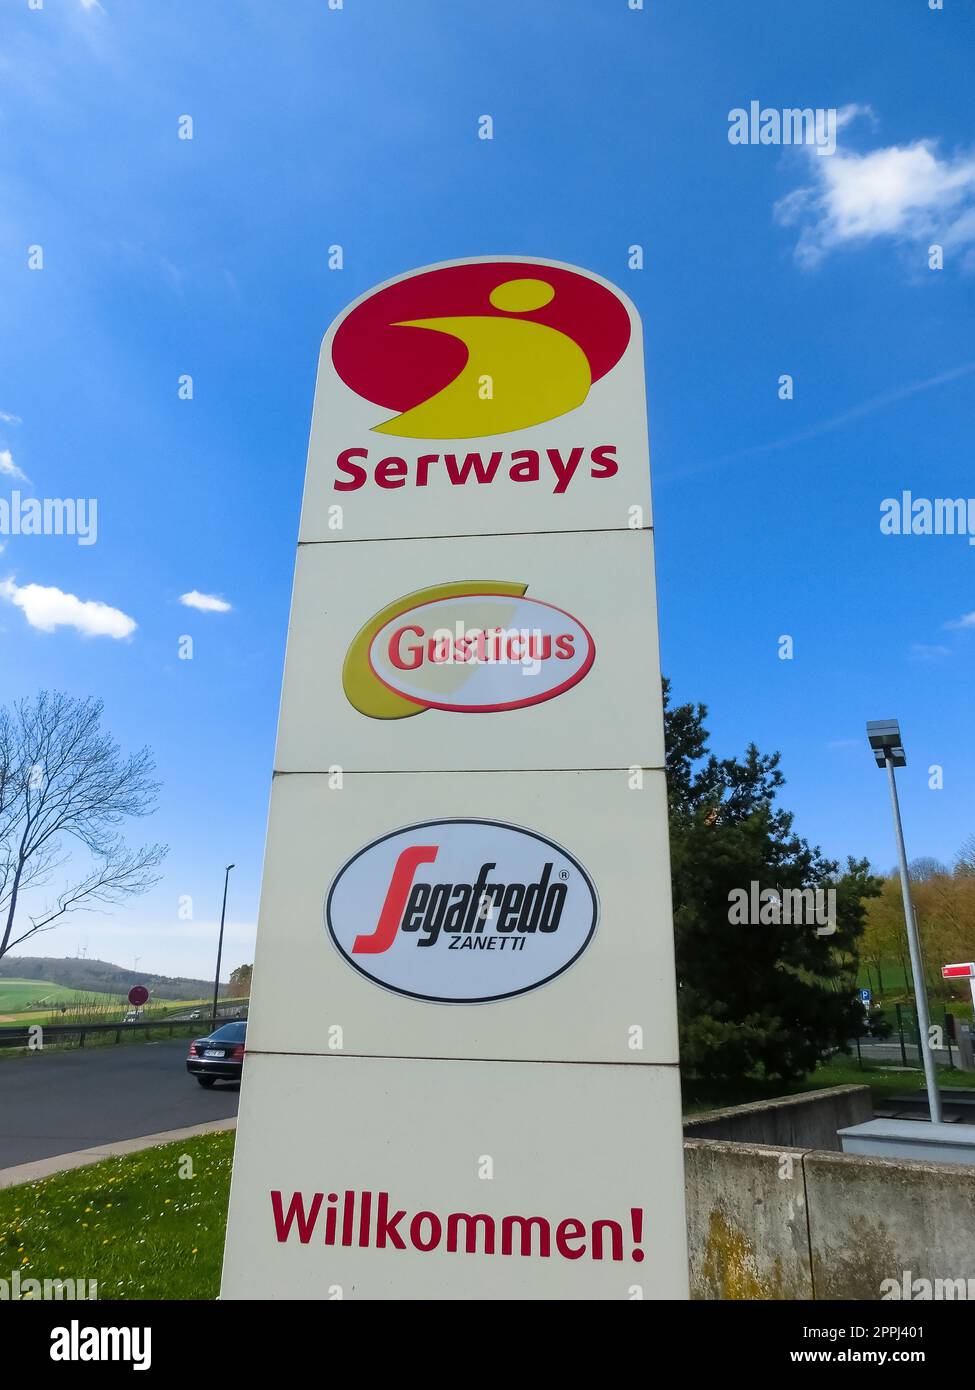 Serways restaurants Gusticus, Segafredo Zanetti. Serways is a brand of Tank and Rast, which leases, operates and manages motorway service stations in Germany. Stock Photo